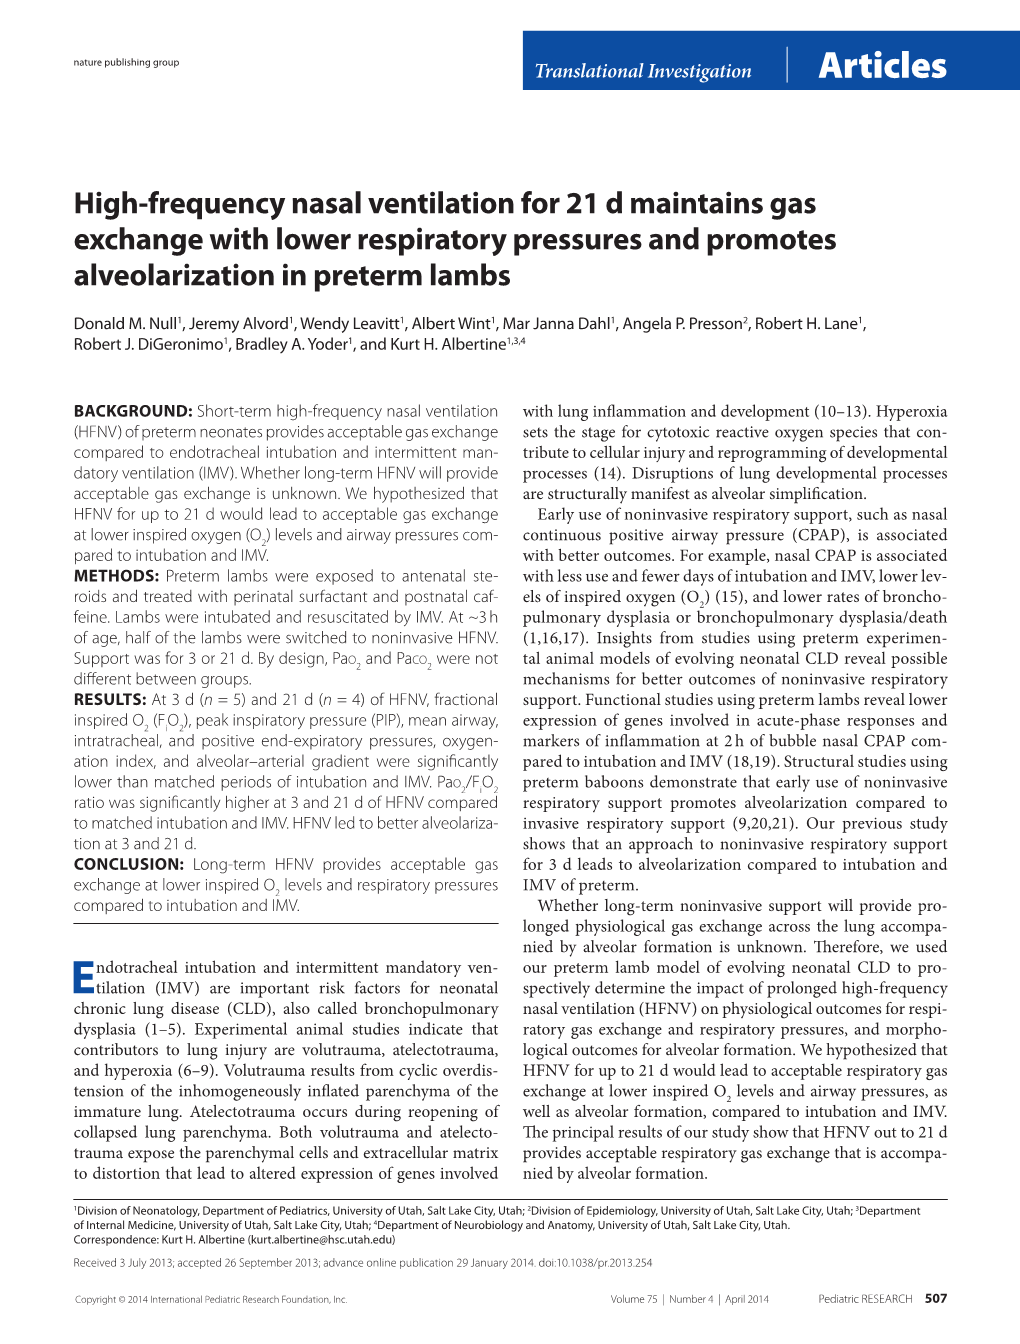 High-Frequency Nasal Ventilation for 21 D Maintains Gas Exchange with Lower Respiratory Pressures and Promotes Alveolarization in Preterm Lambs